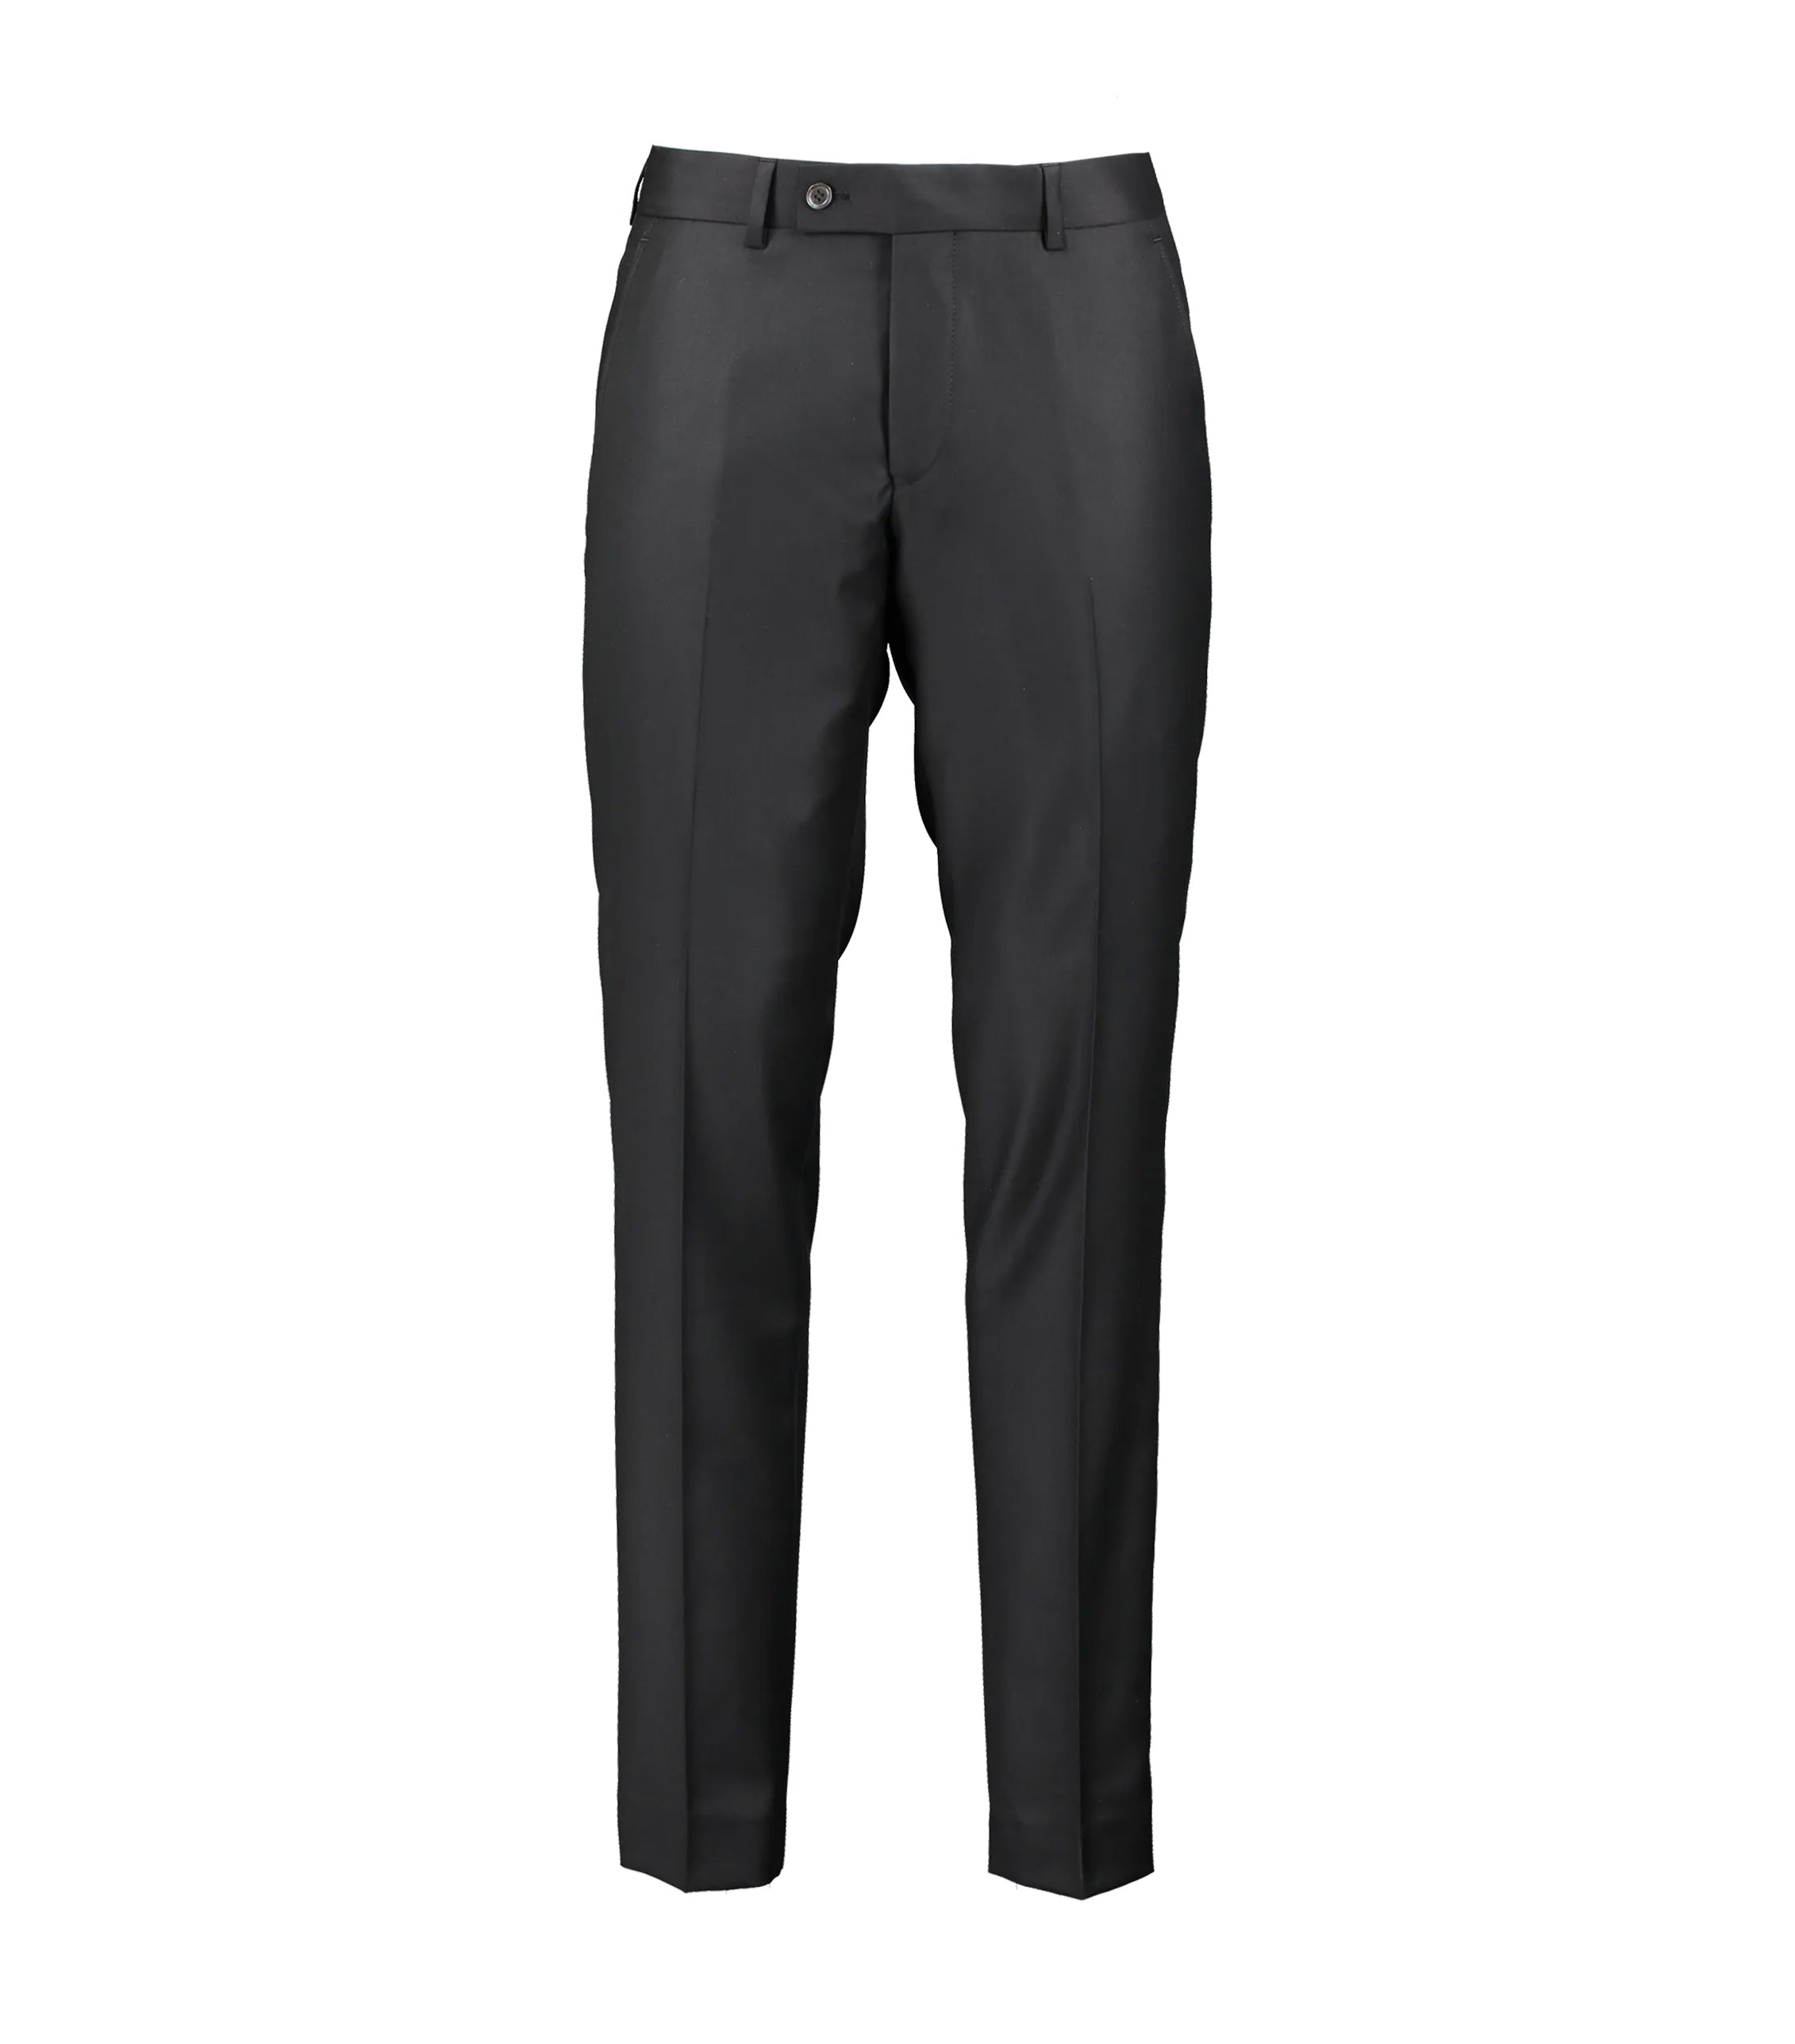 Sven Grey Trousers – SIR of Sweden